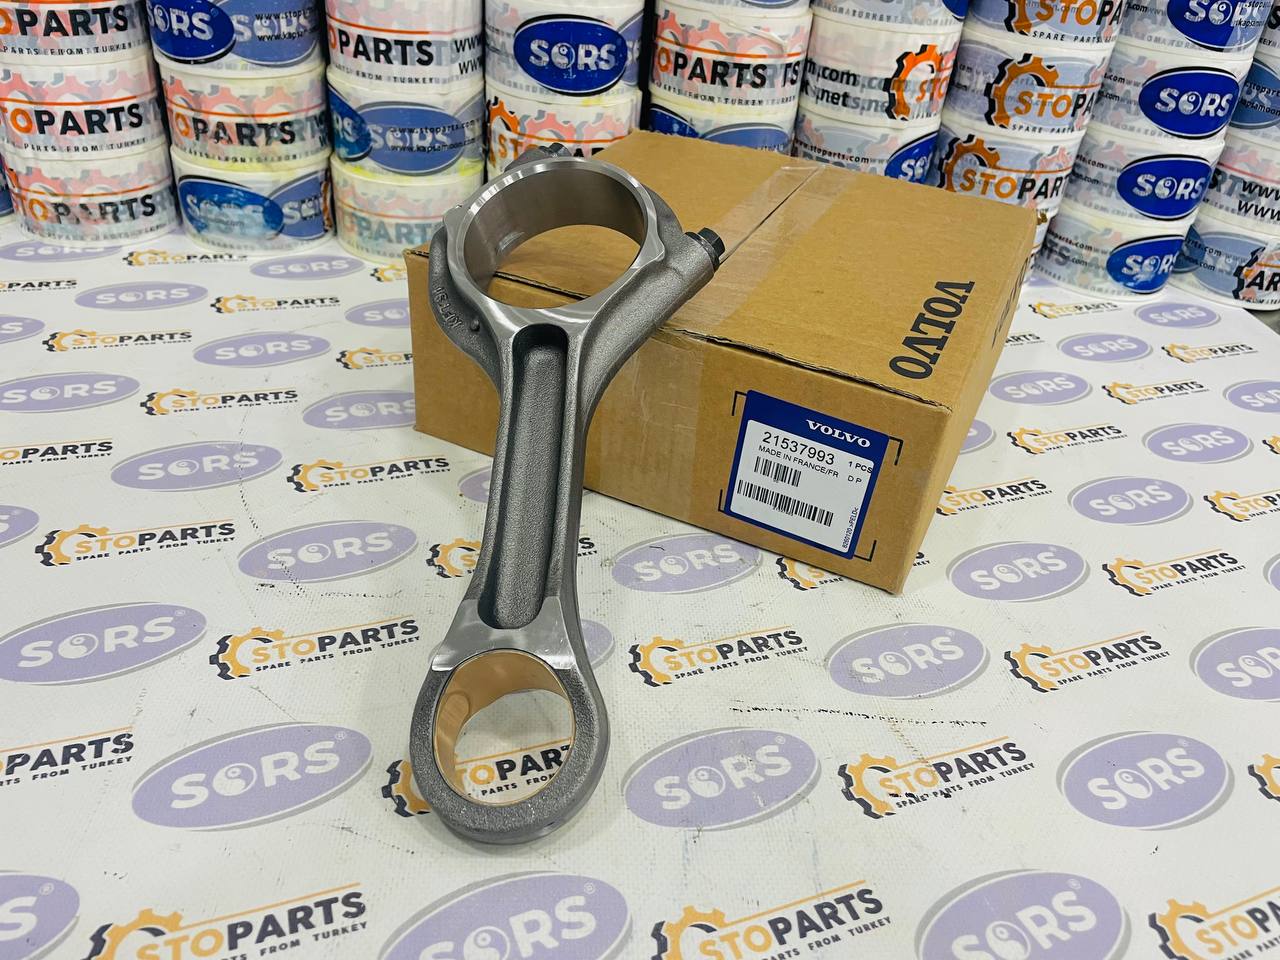 CONNECTING ROD 21537993 FOR VOLVO PENTA